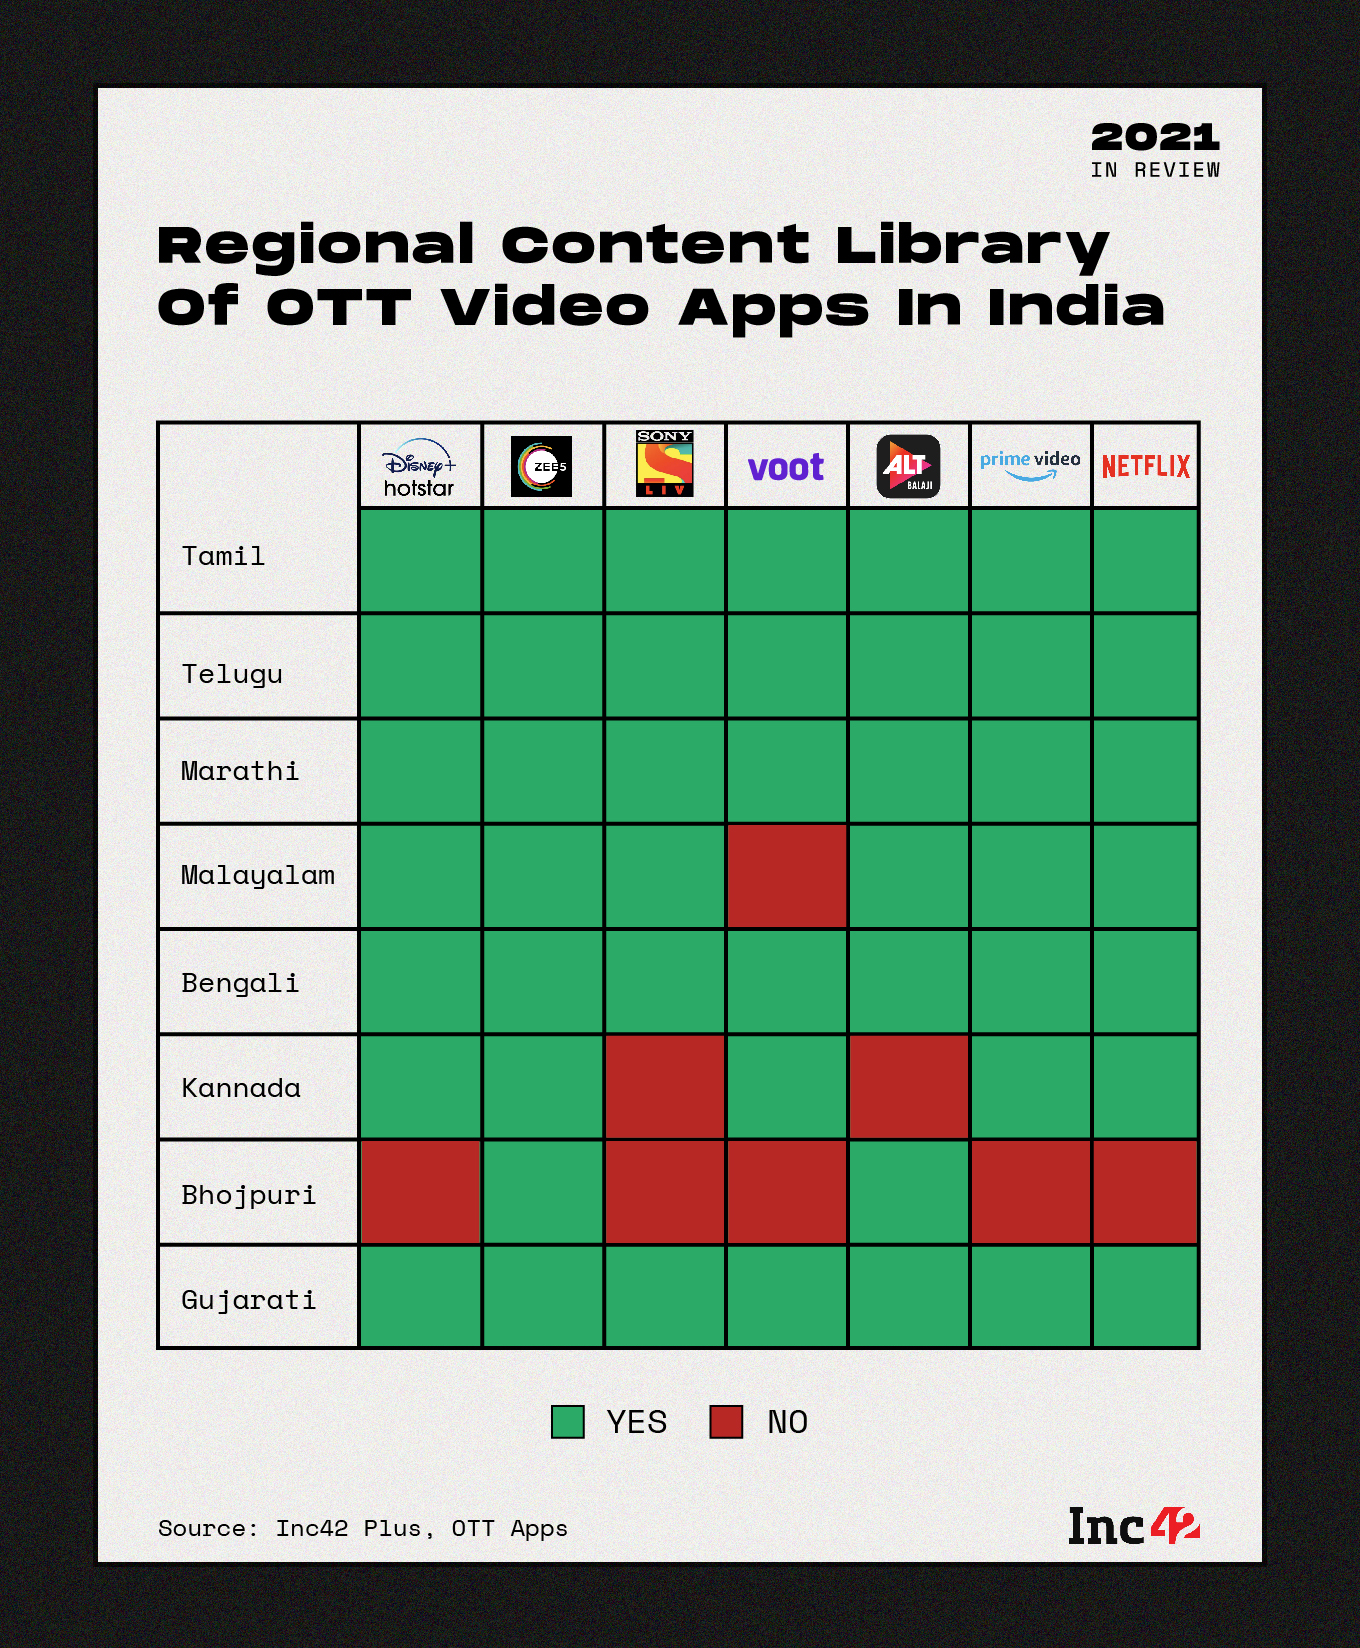 Regional Content Library Of OTT Video Apps